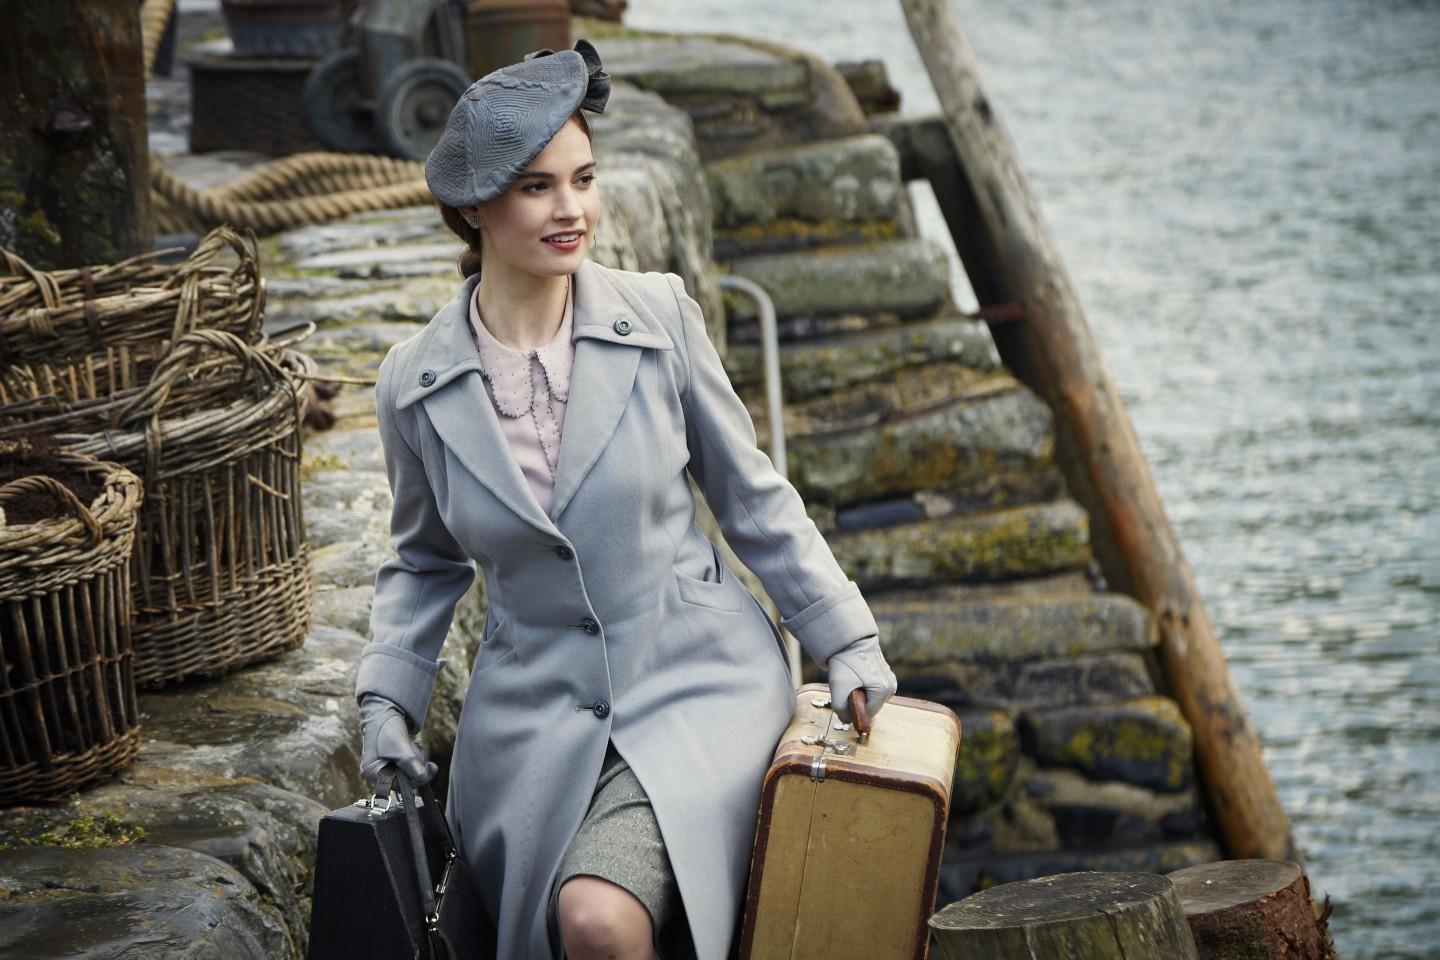 The Guernsey Literary and Potato Peel Pie Society film still - Lily James playing Juliet Ashton (02) © STUDIOCANAL S.A.S